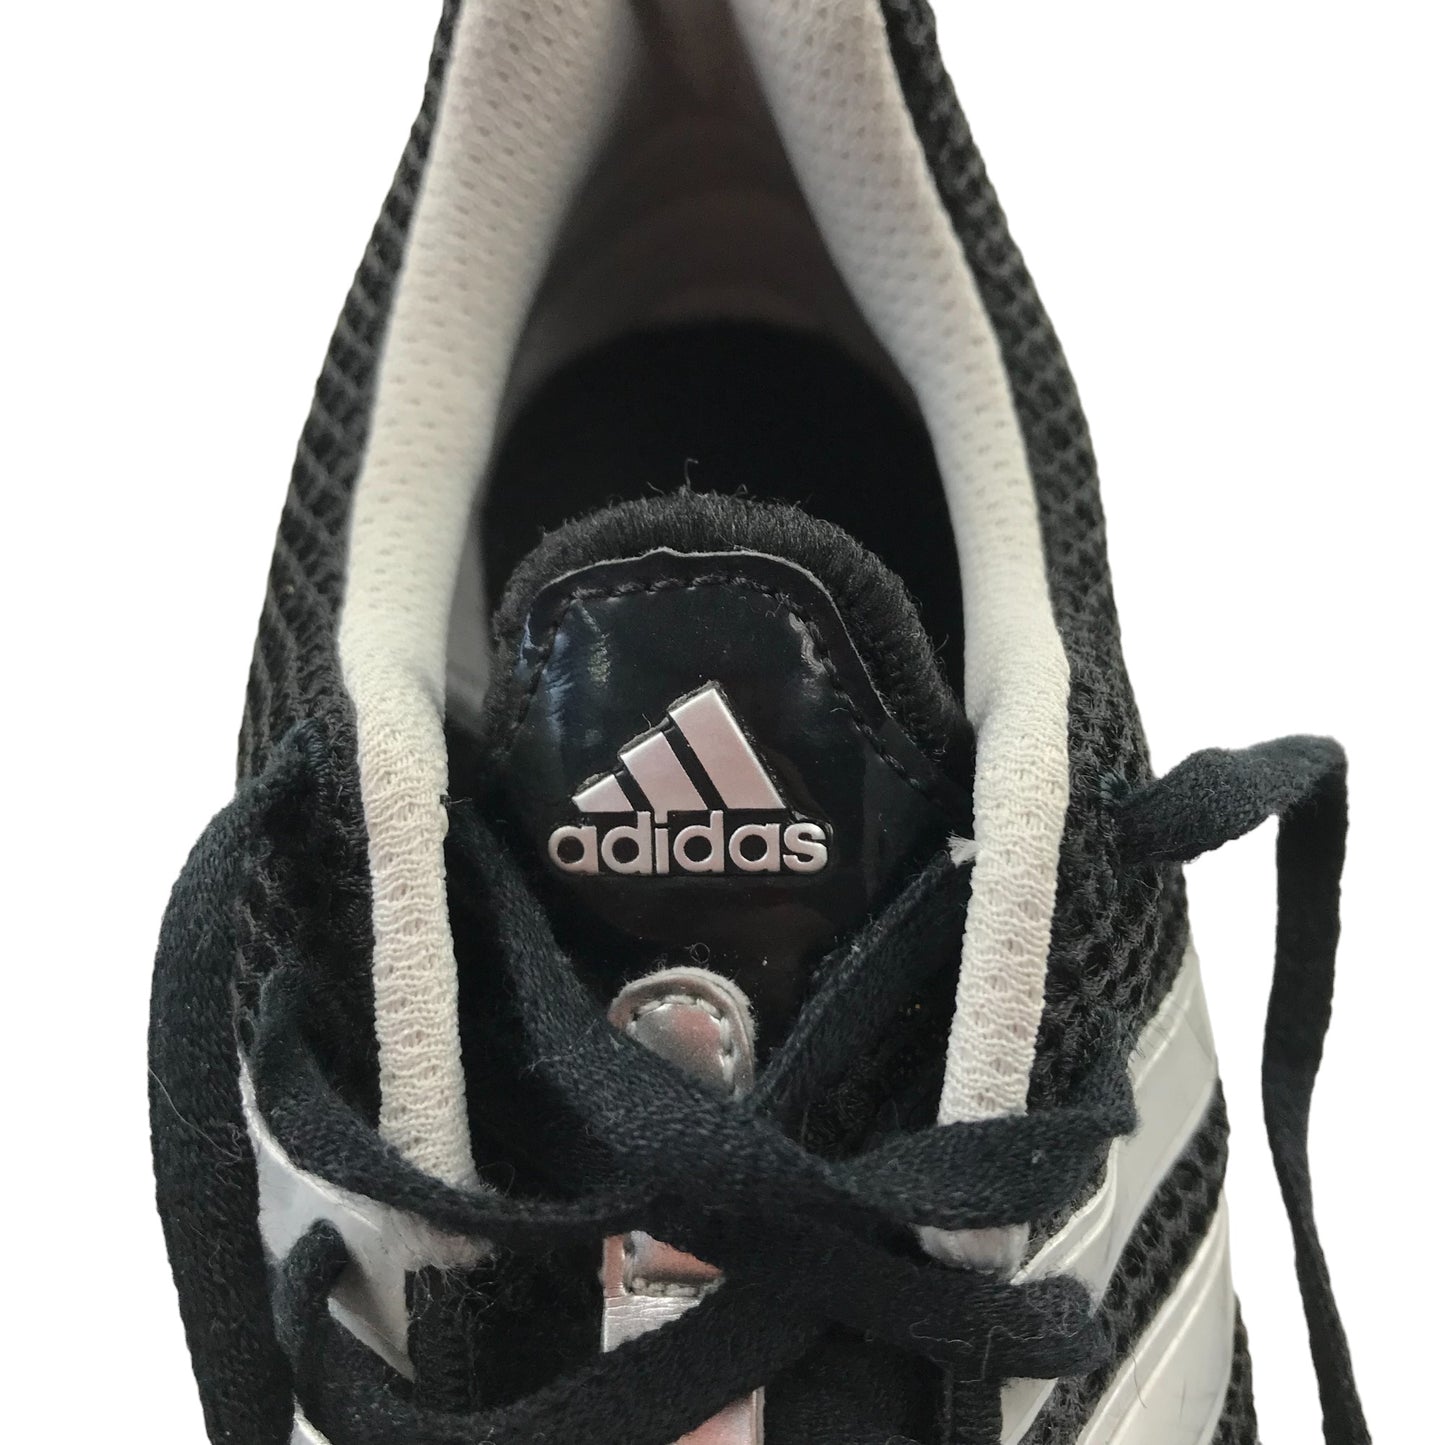 Adidas Track Running Sports Shoes Shoe Size 5.5 Black Silver and White Details Needs replacement Spikes